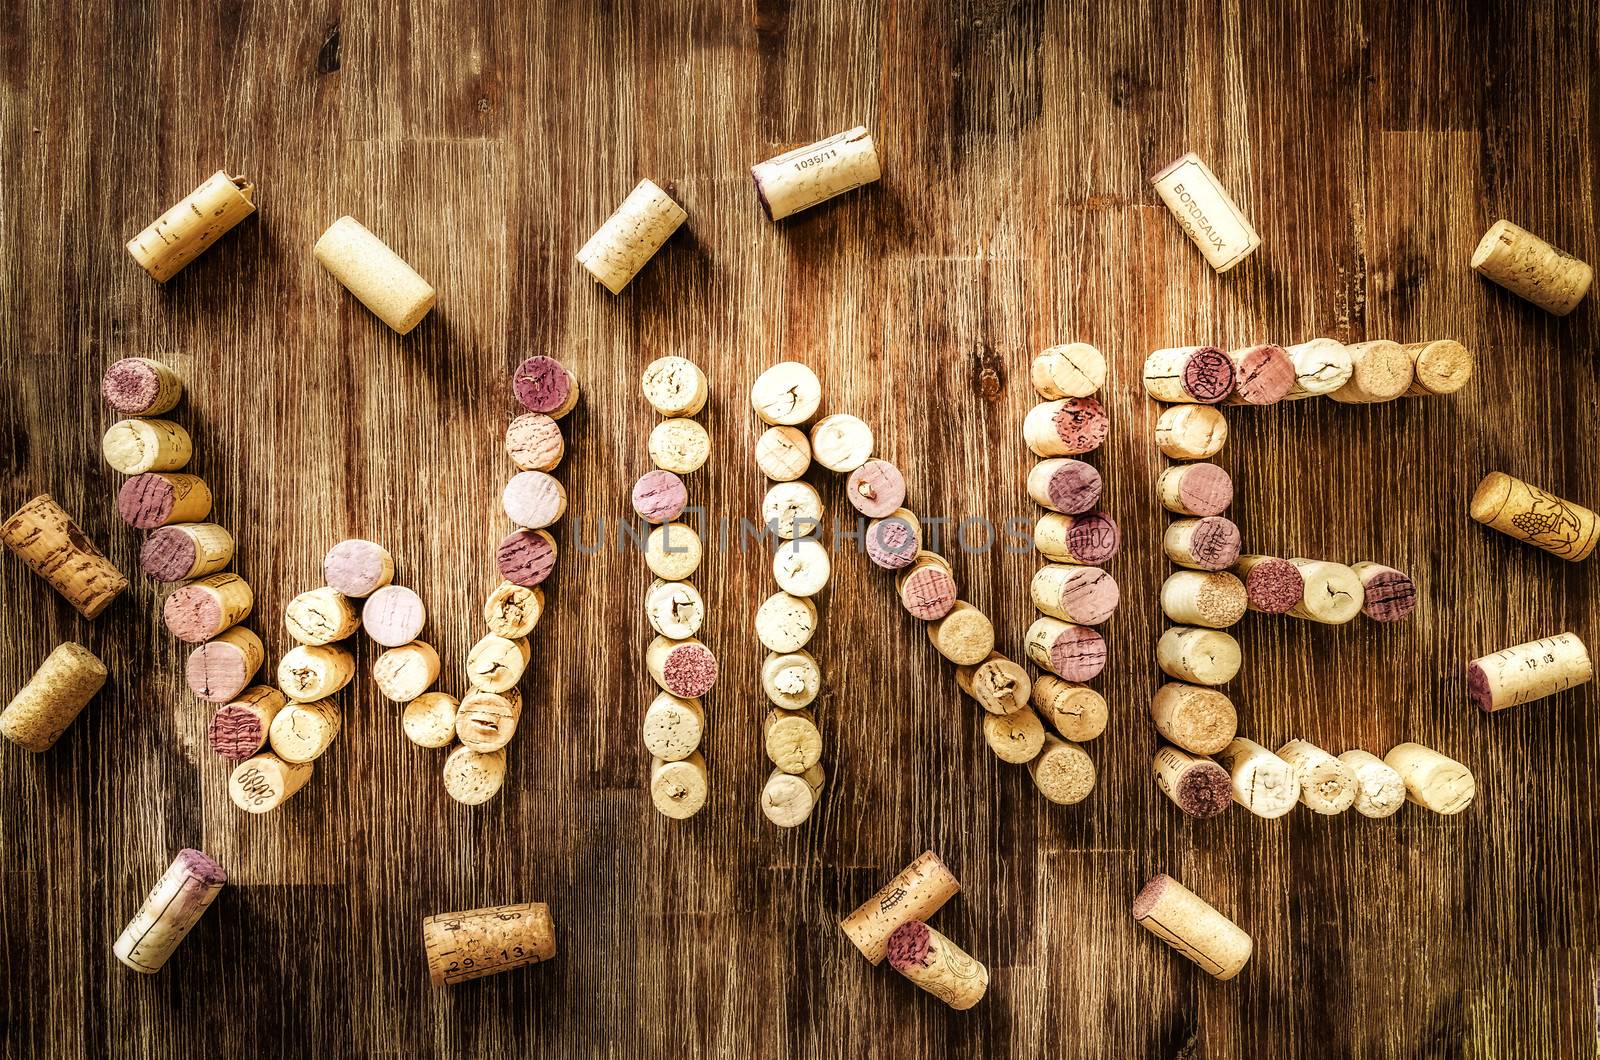 Sign wine made from corks on old wooden vintage table